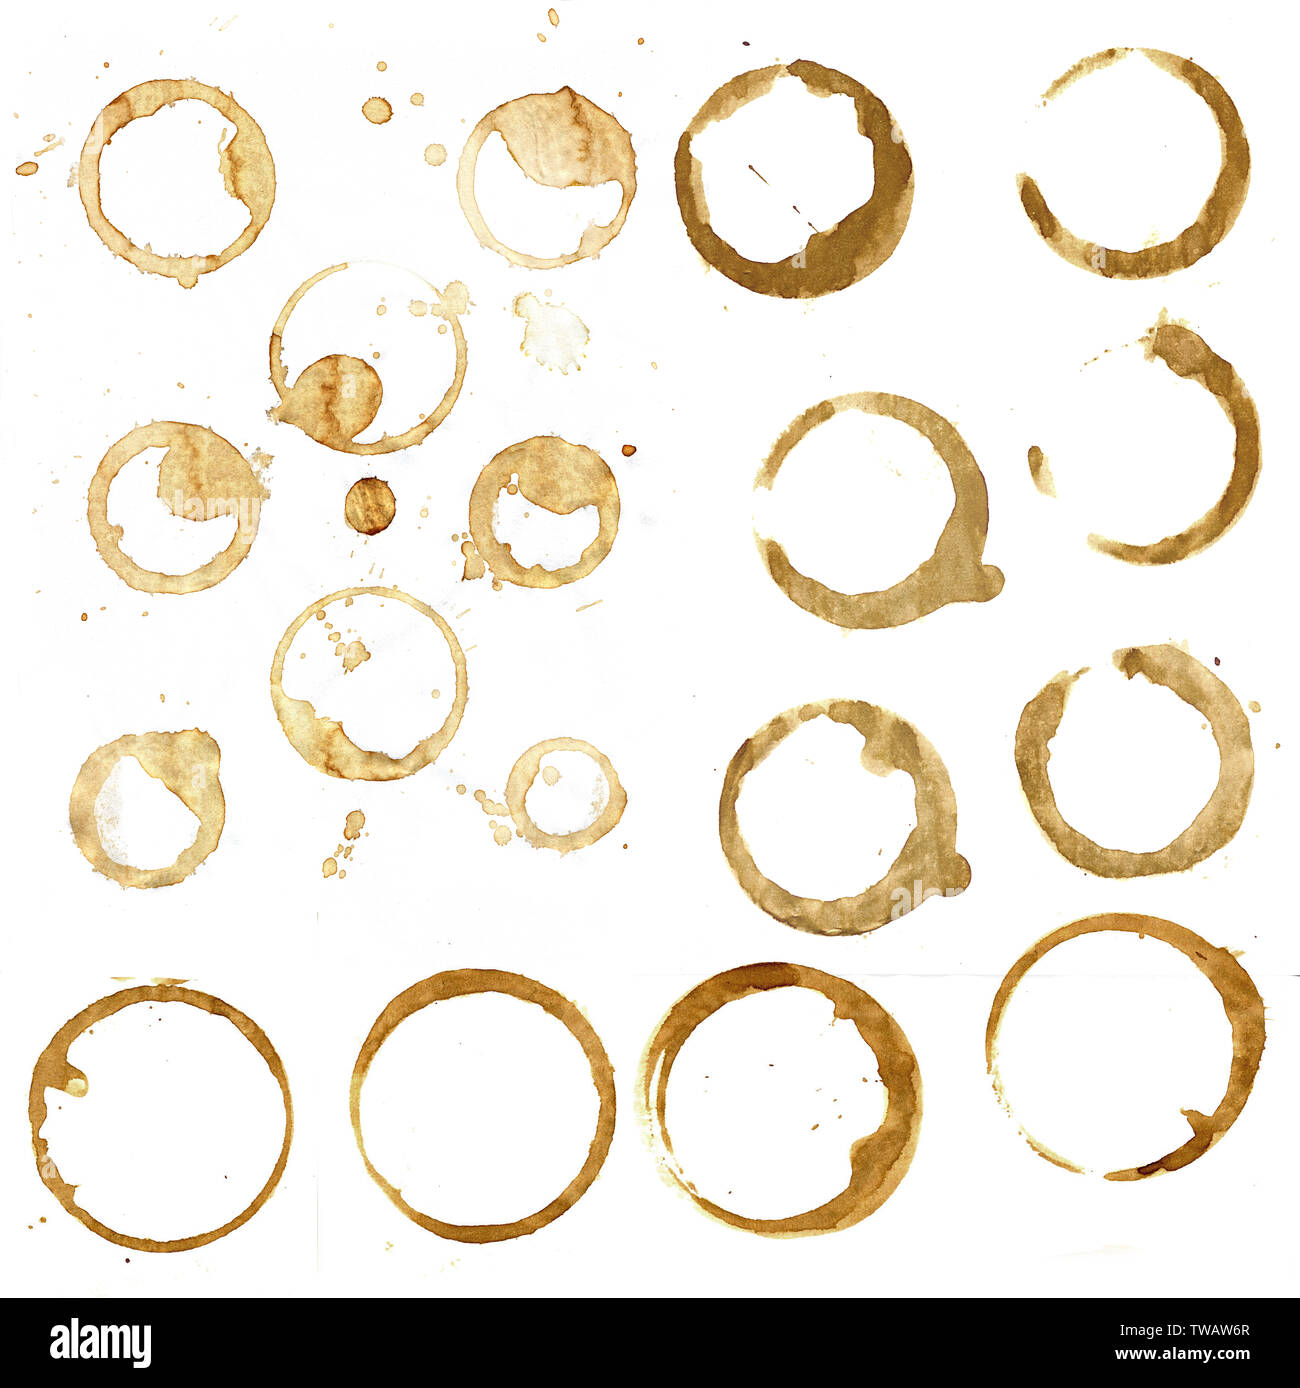 Coffee stain set collection isolated on white background Stock Photo